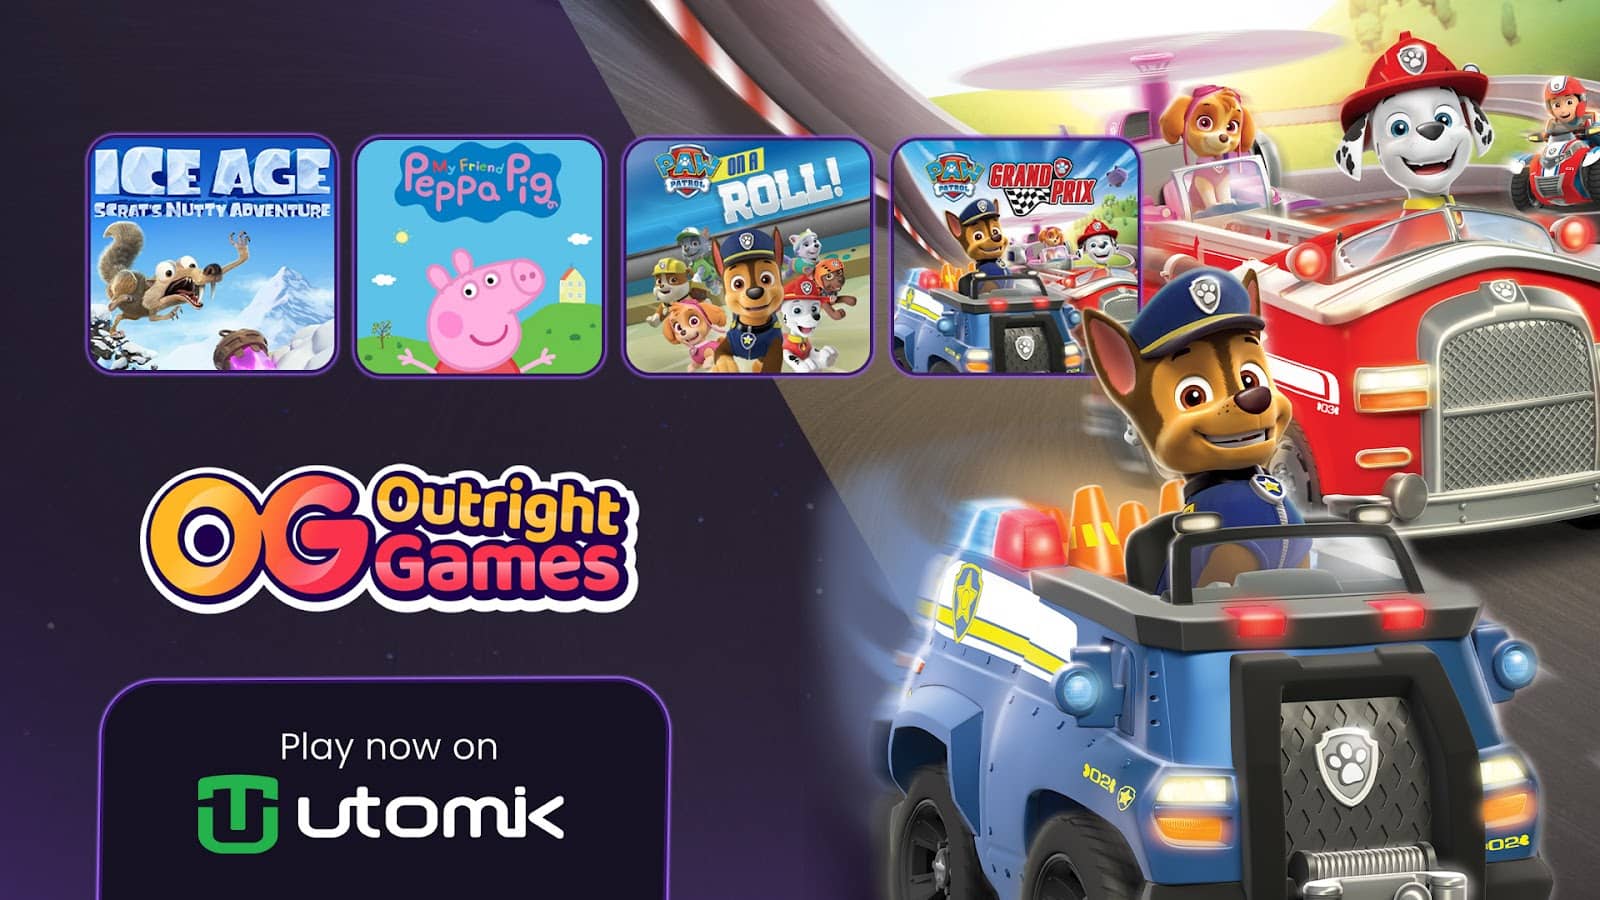 Read more about the article Unite the Family with Utomik’s Epic Family Fiesta and Gaming Magic with the likes of Paw Patrol, Peppa Pig, and more!